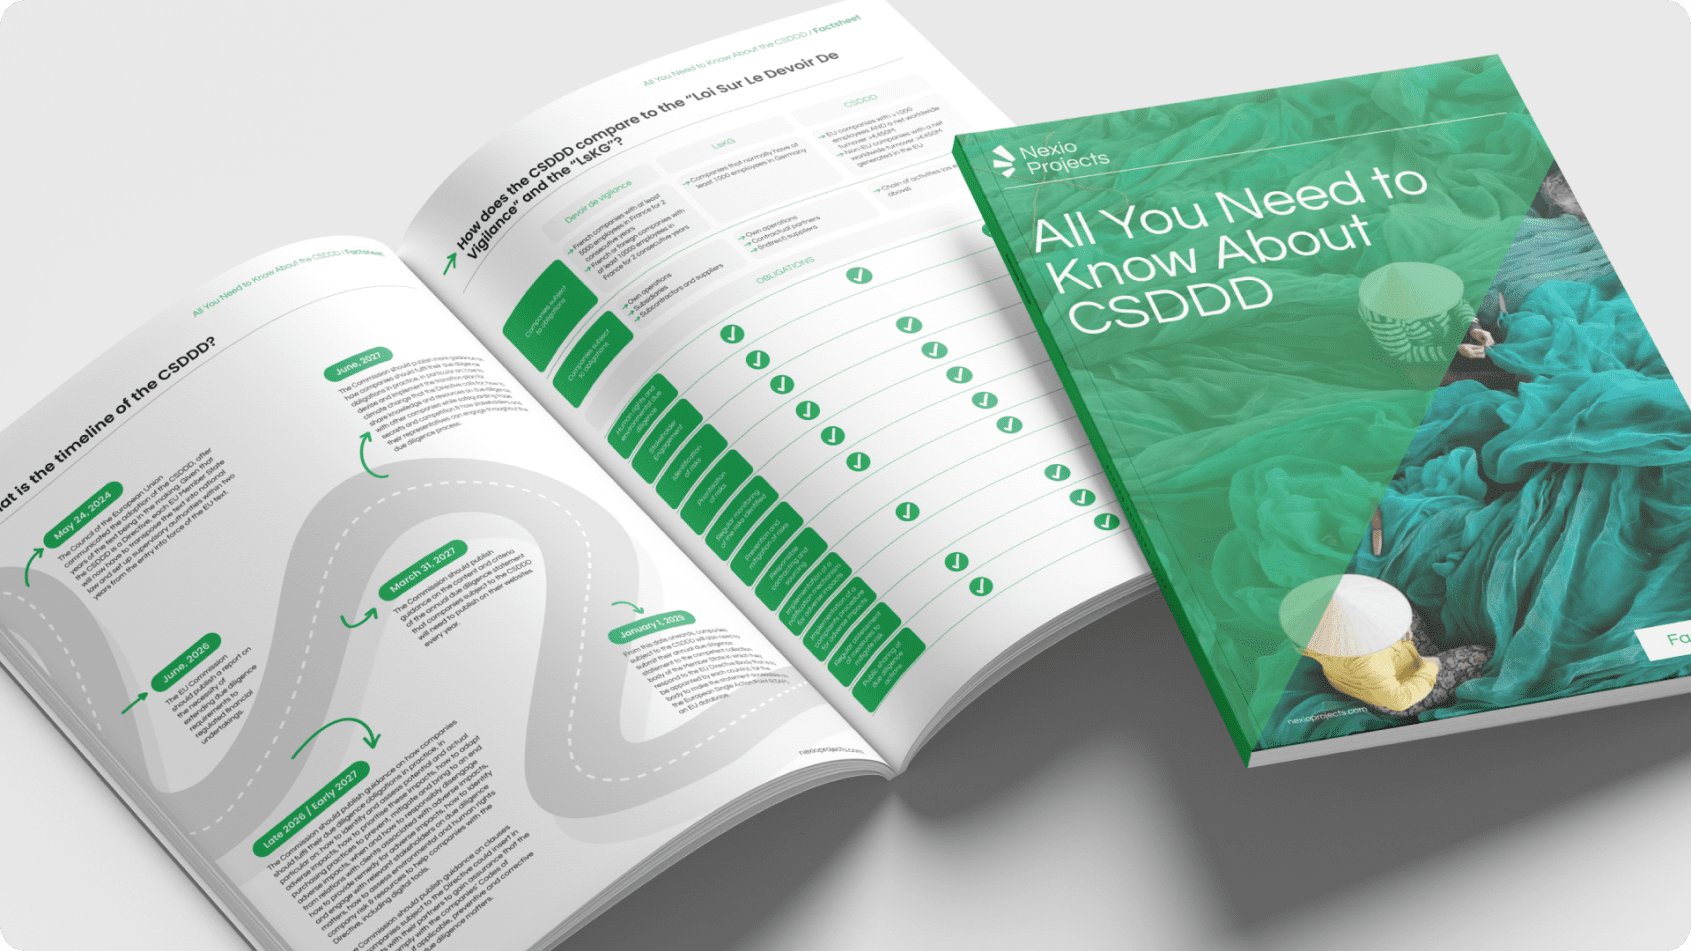 Factsheet: All You Need to Know About CSDDD